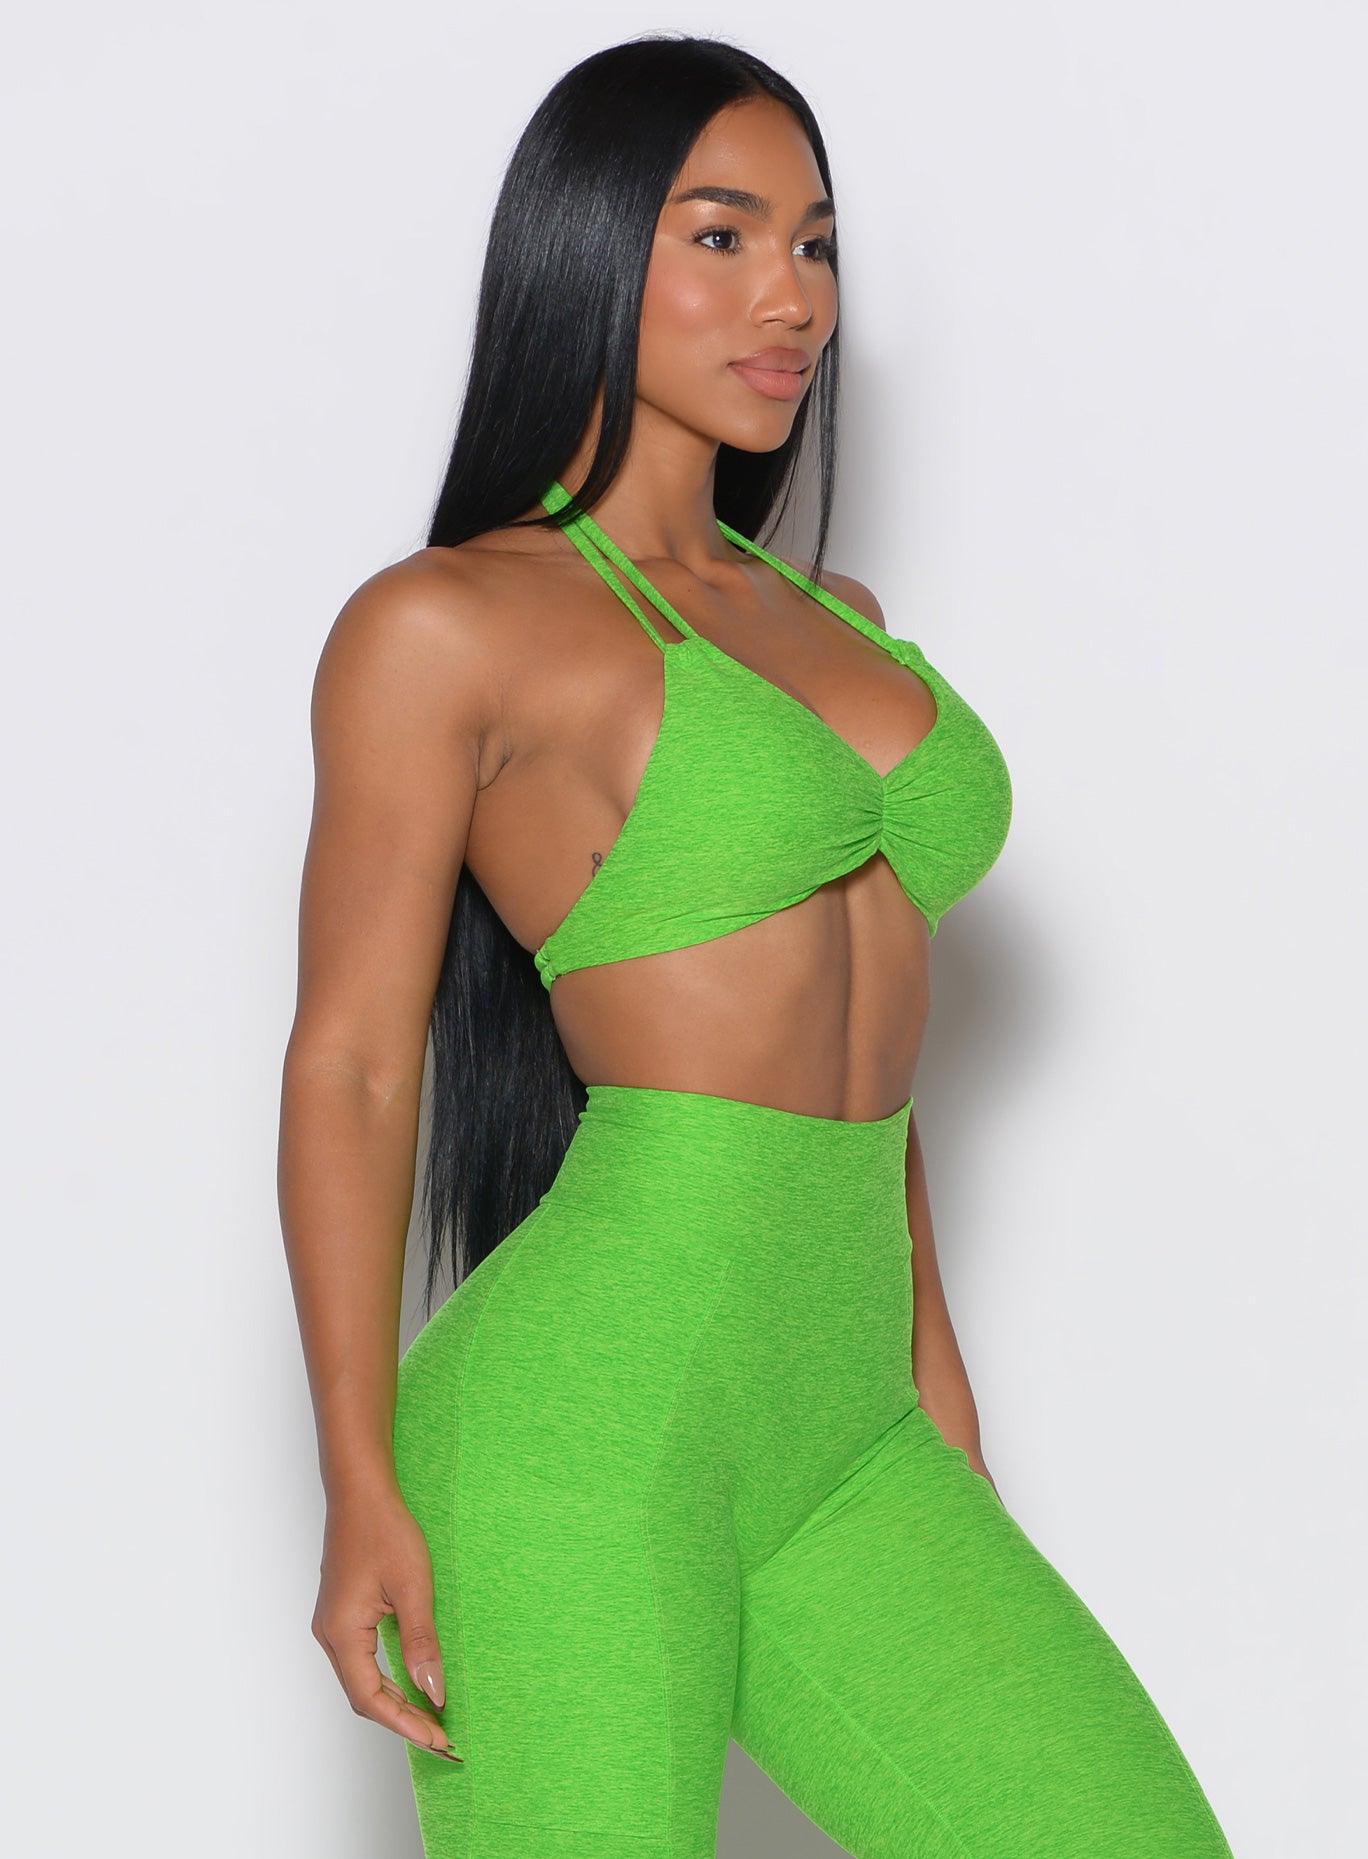 right side profile view of a model wearing our butterfly sports bra in neon lime green color along with the matching leggings